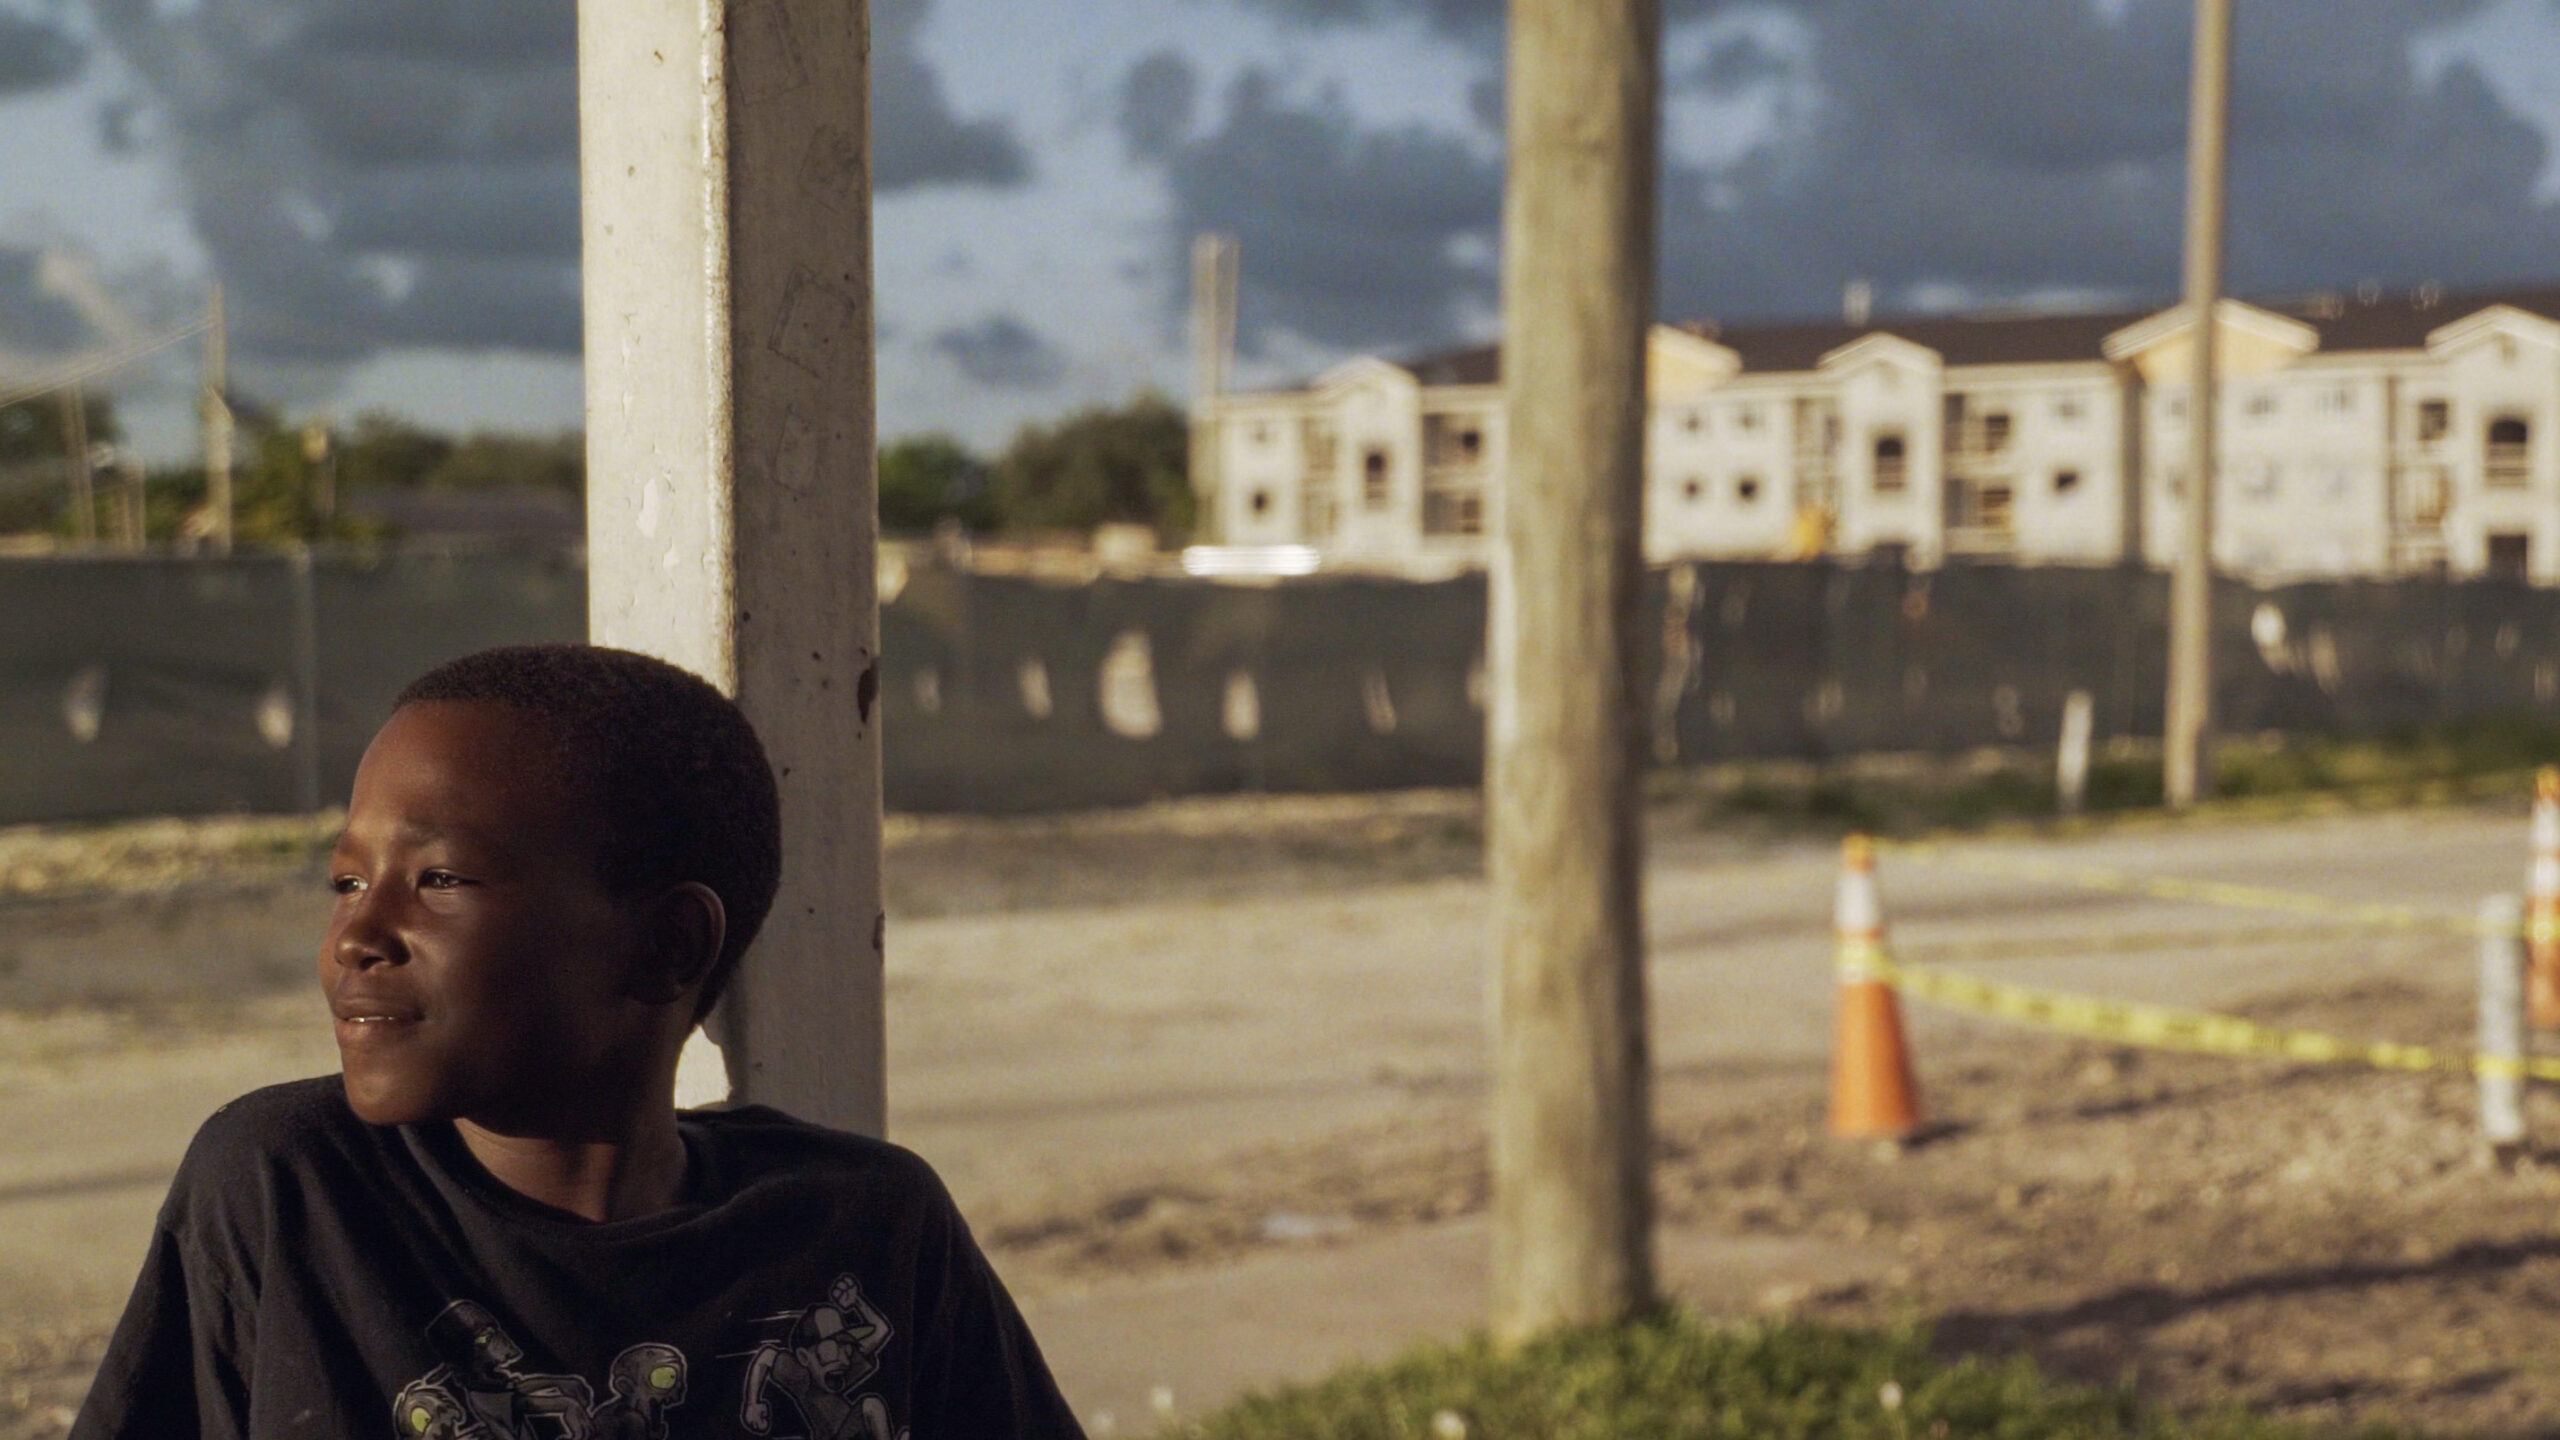 Young Boy looks off into the distance. In the background is building complex and construction site